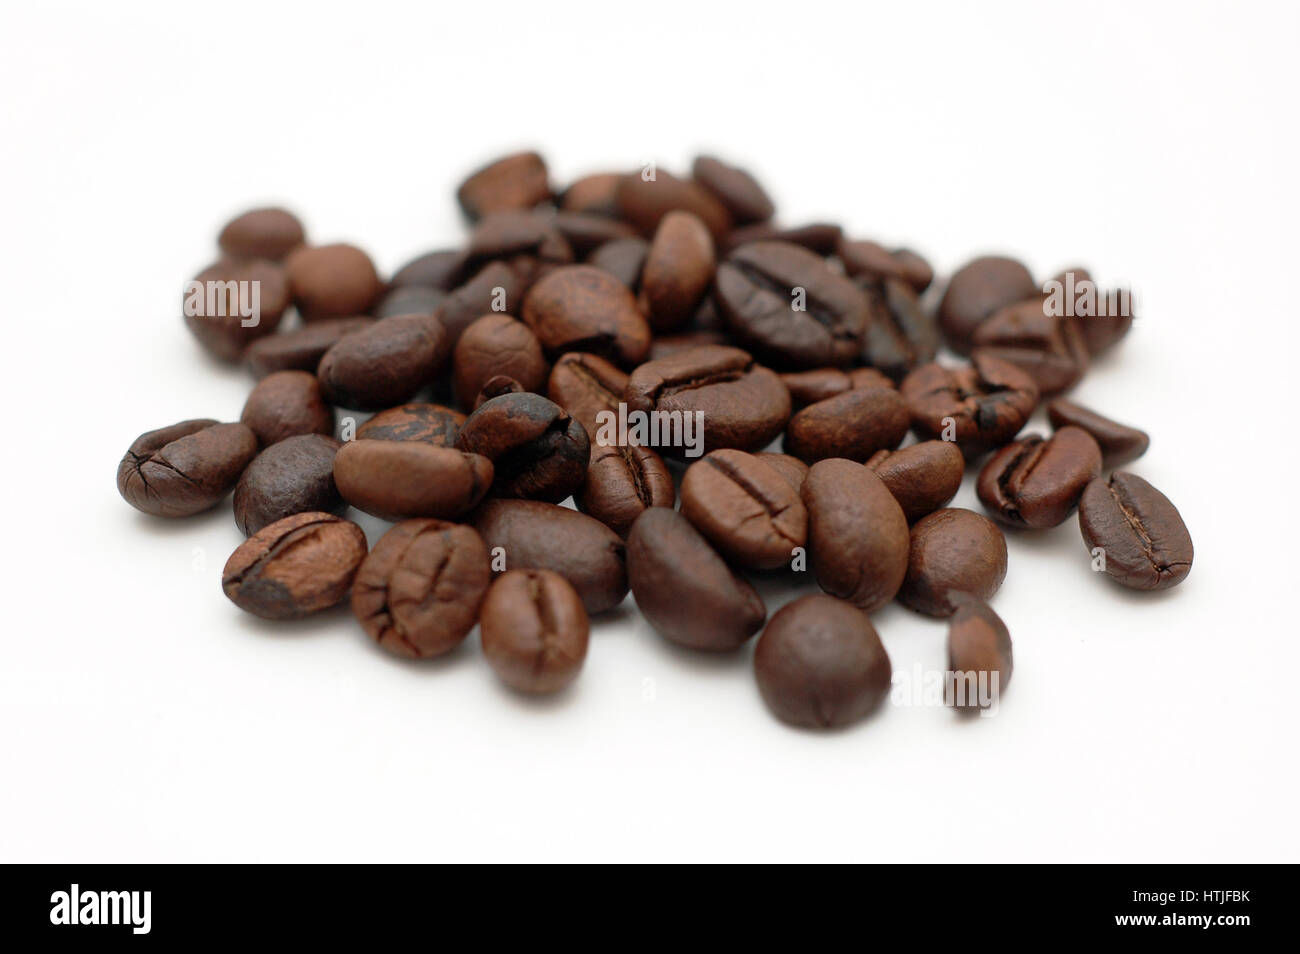 Macro on a small pile of coffee beans. Stock Photo